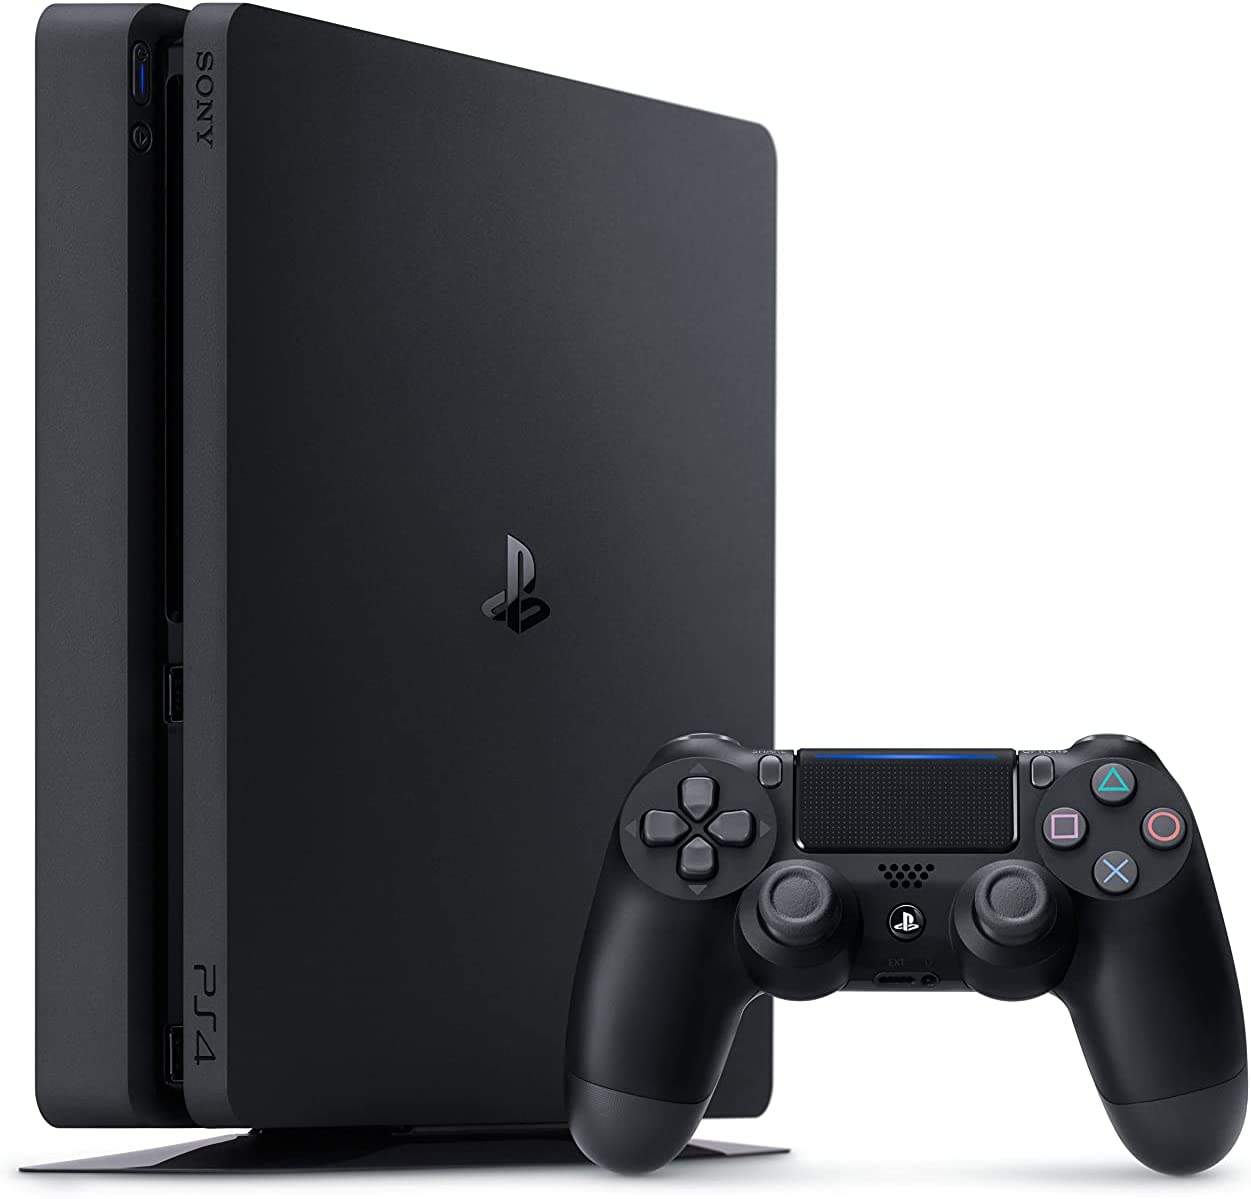 Picture of a Sony PlayStation 4 and a DualShock 4 controller